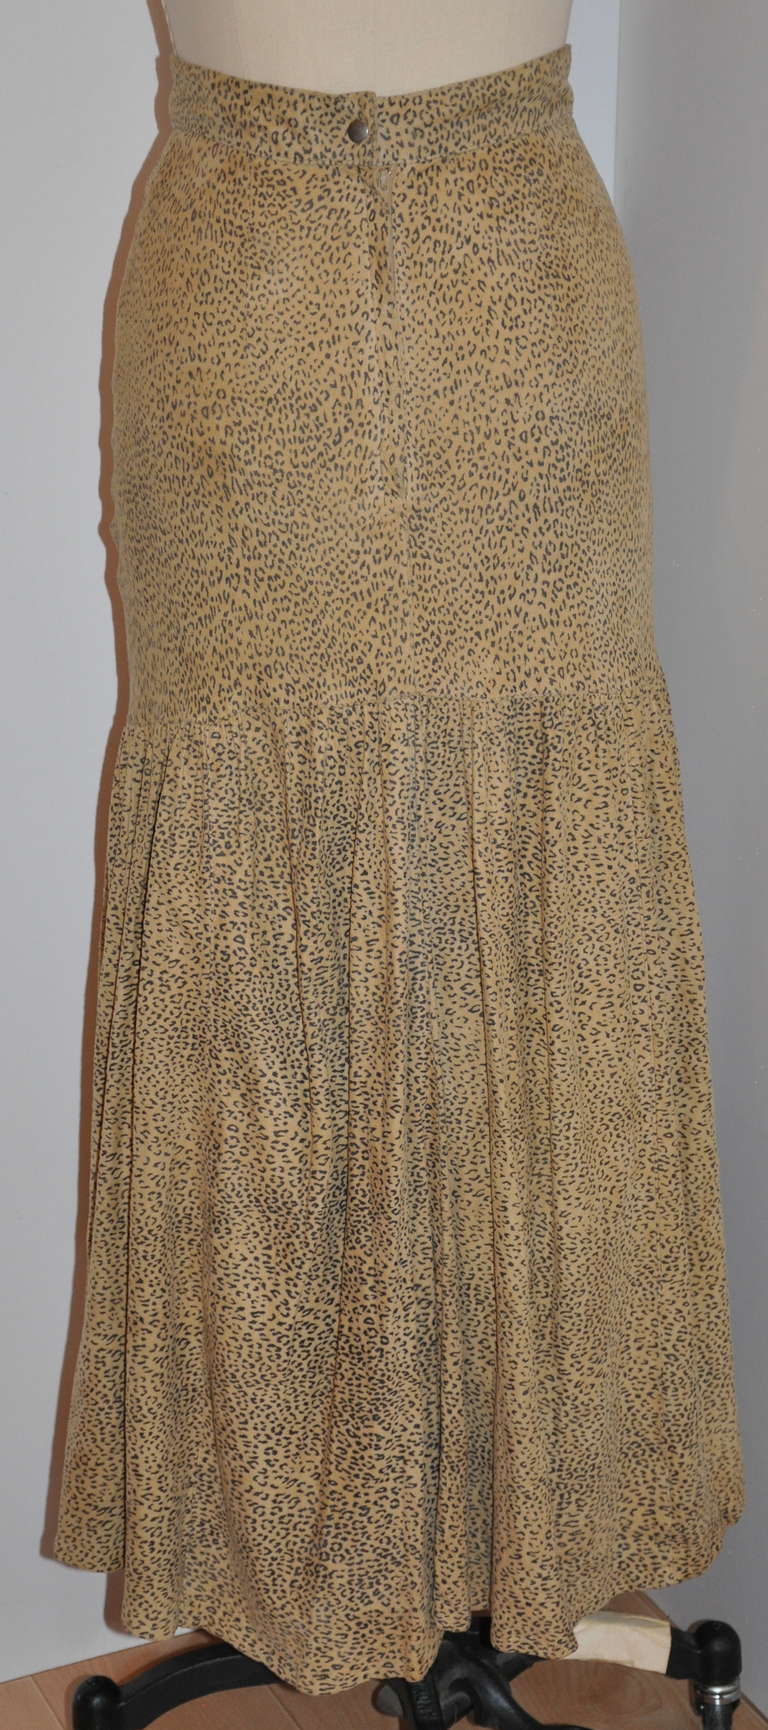 Michael Hoban for North Beach Leather 2-tier chamois leopard print leather skirt measures 26